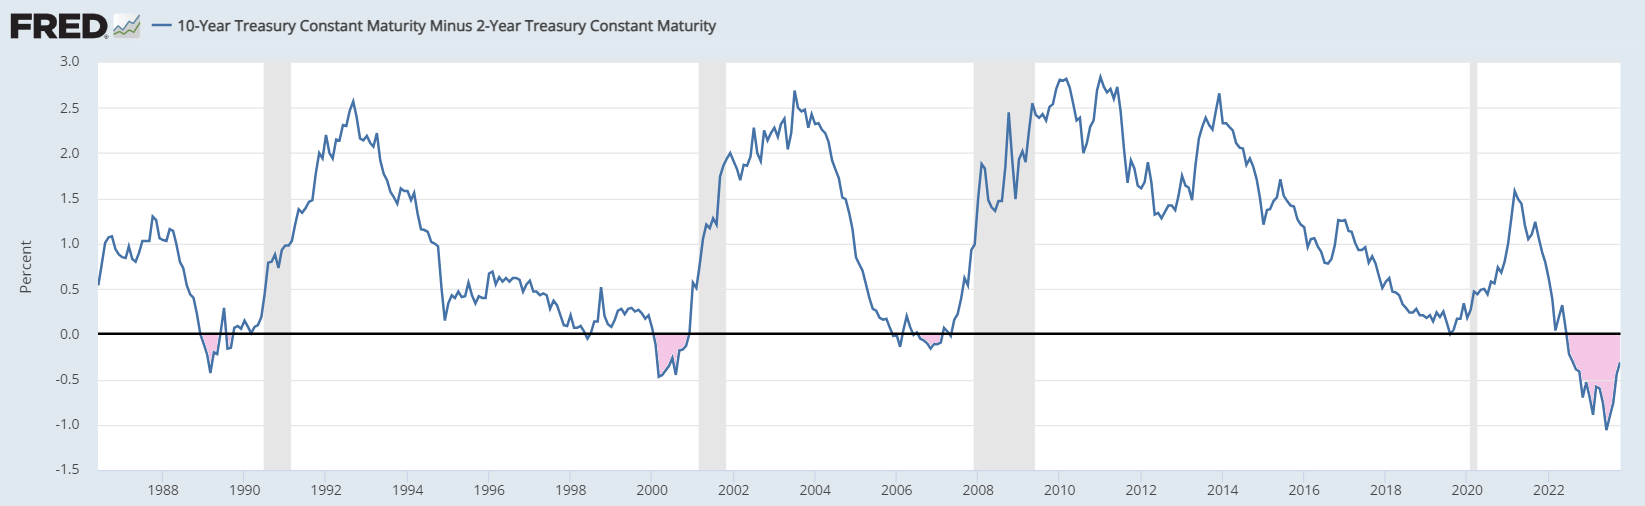 Figure 7. Inverted Yield Curve trouble ; 10-year treasury constant maturity minus 2-year treasury constant maturity